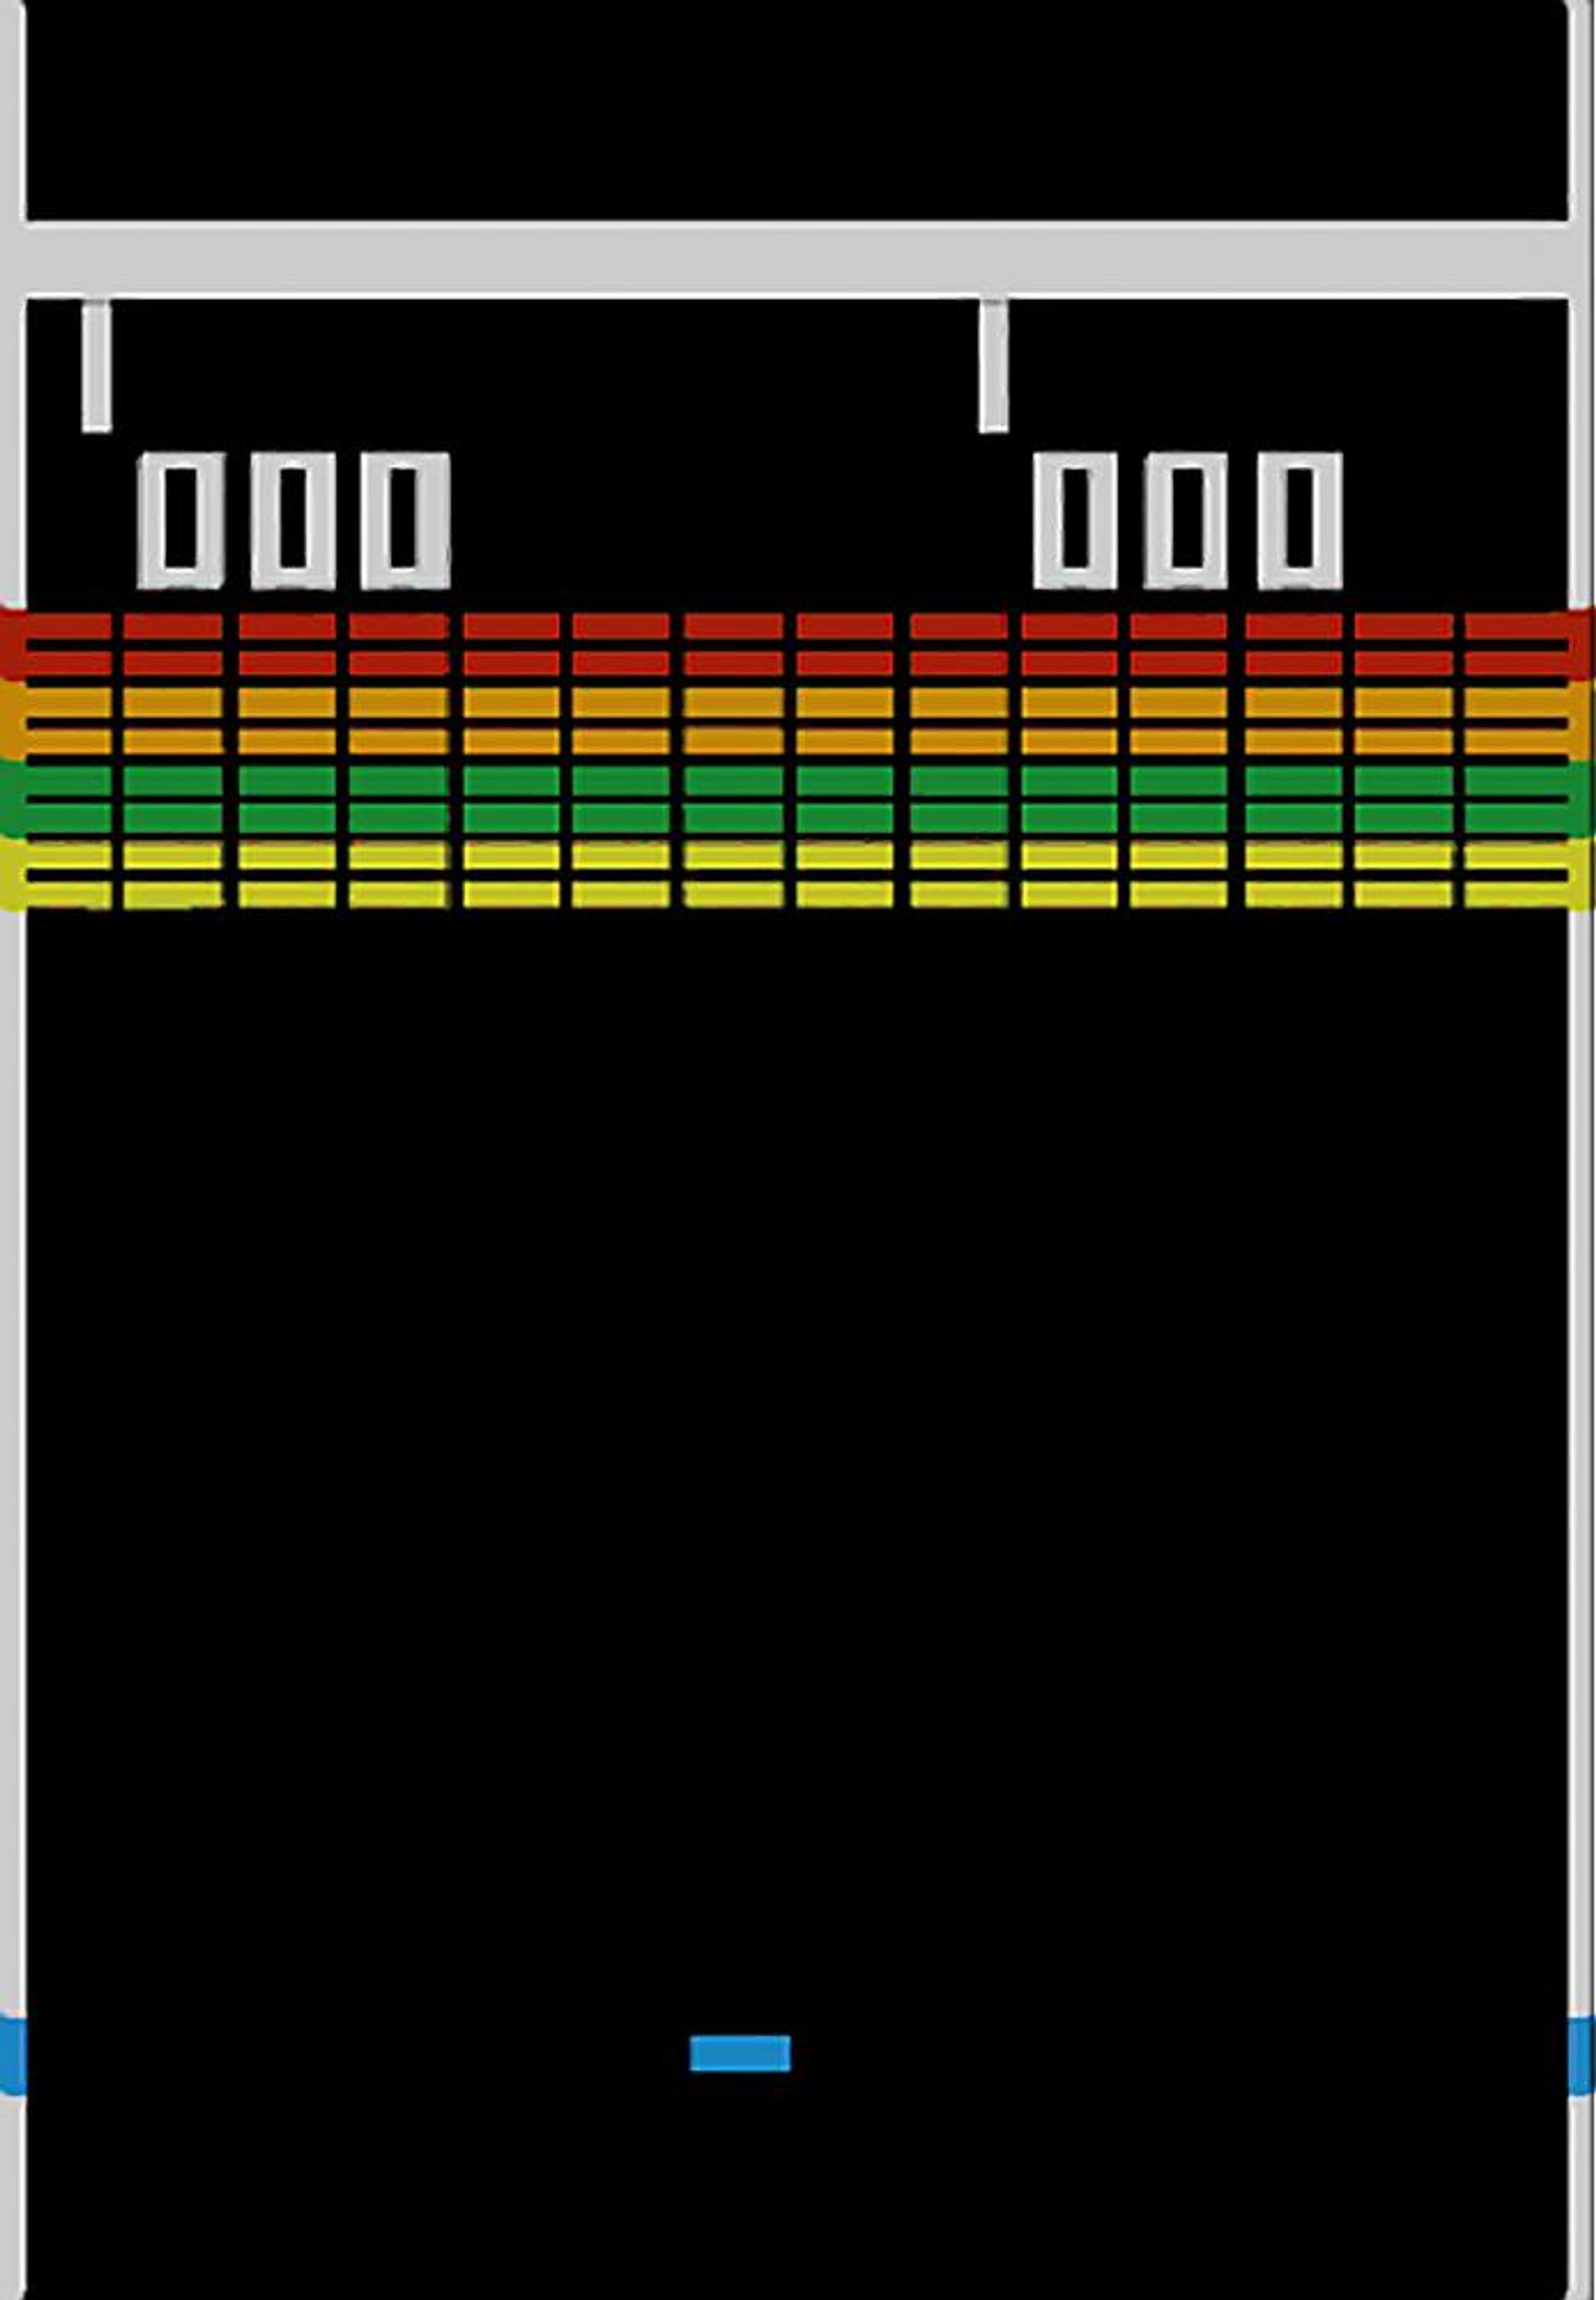 atari breakout game screen showing a paddle at bottom and rows of colored bricks and two score fields at top